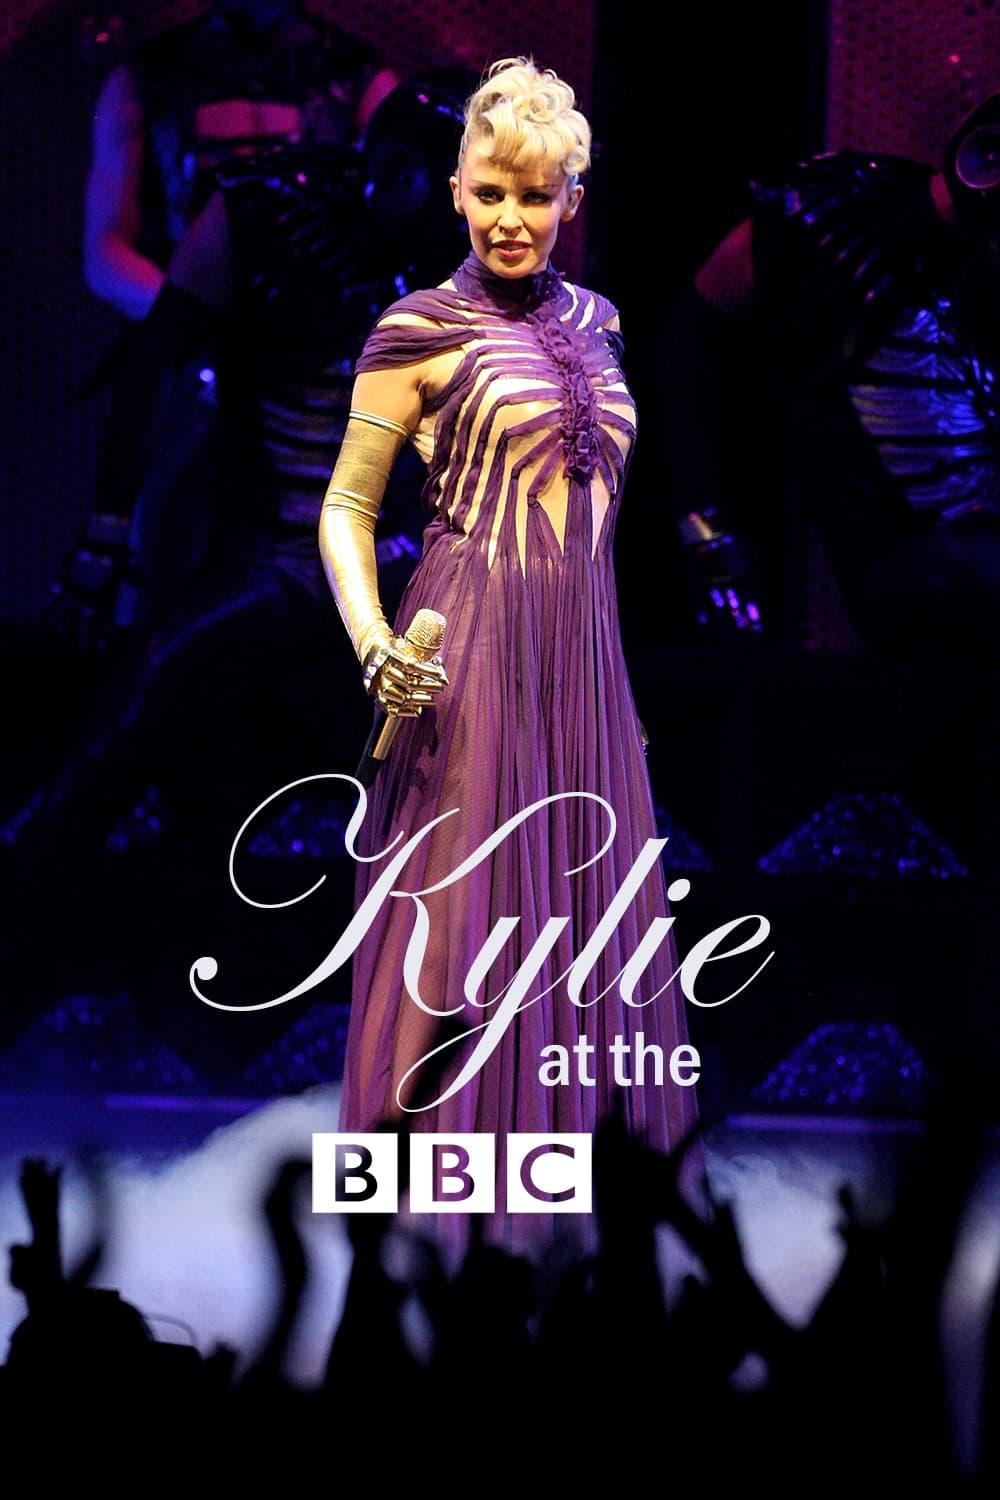 Kylie at the BBC poster